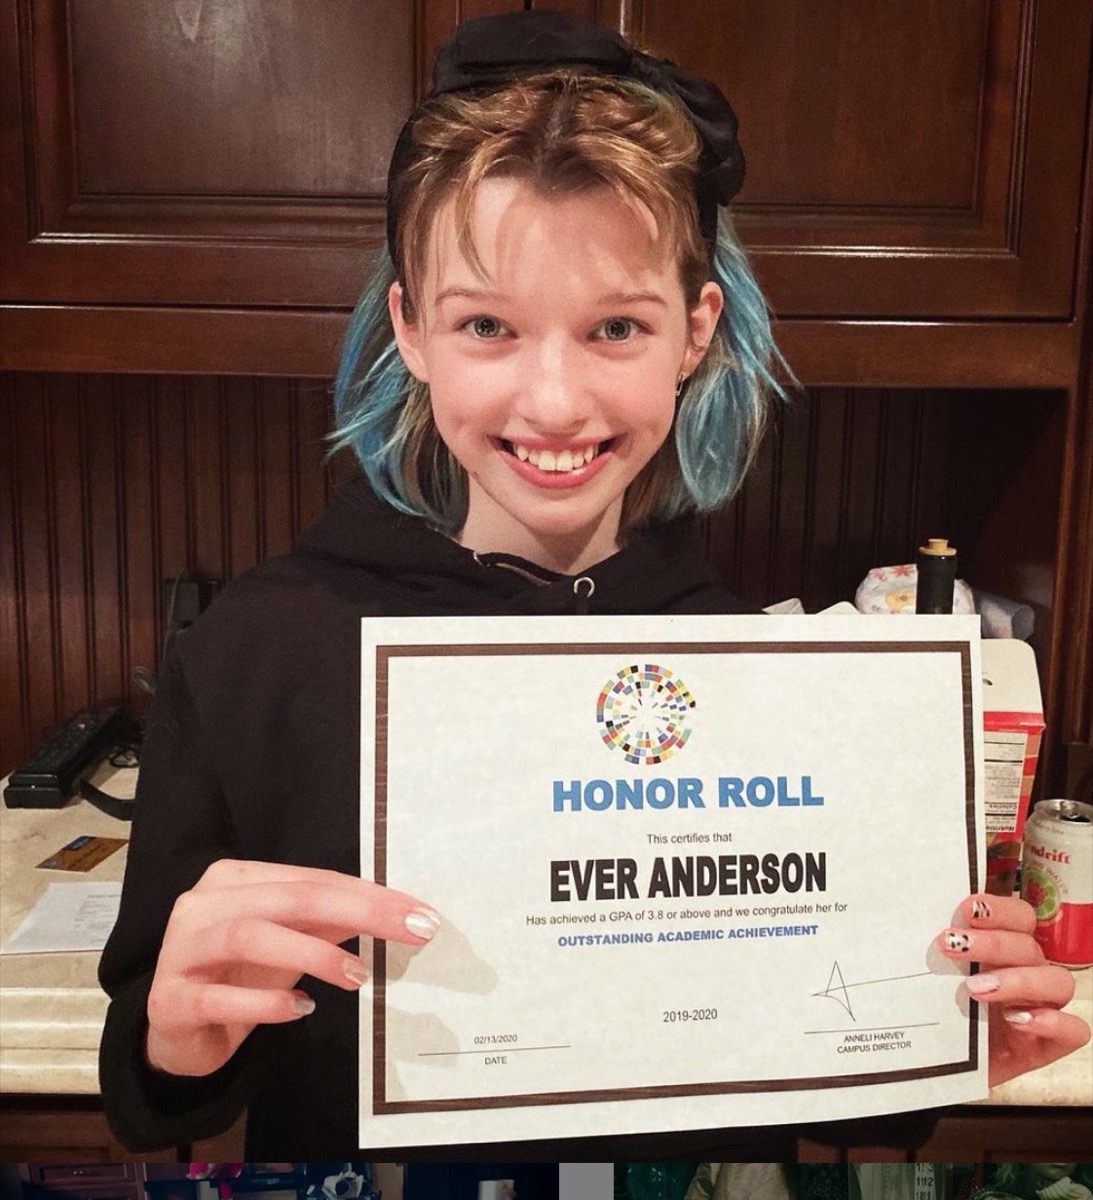 ever anderson holding up honor roll certificate